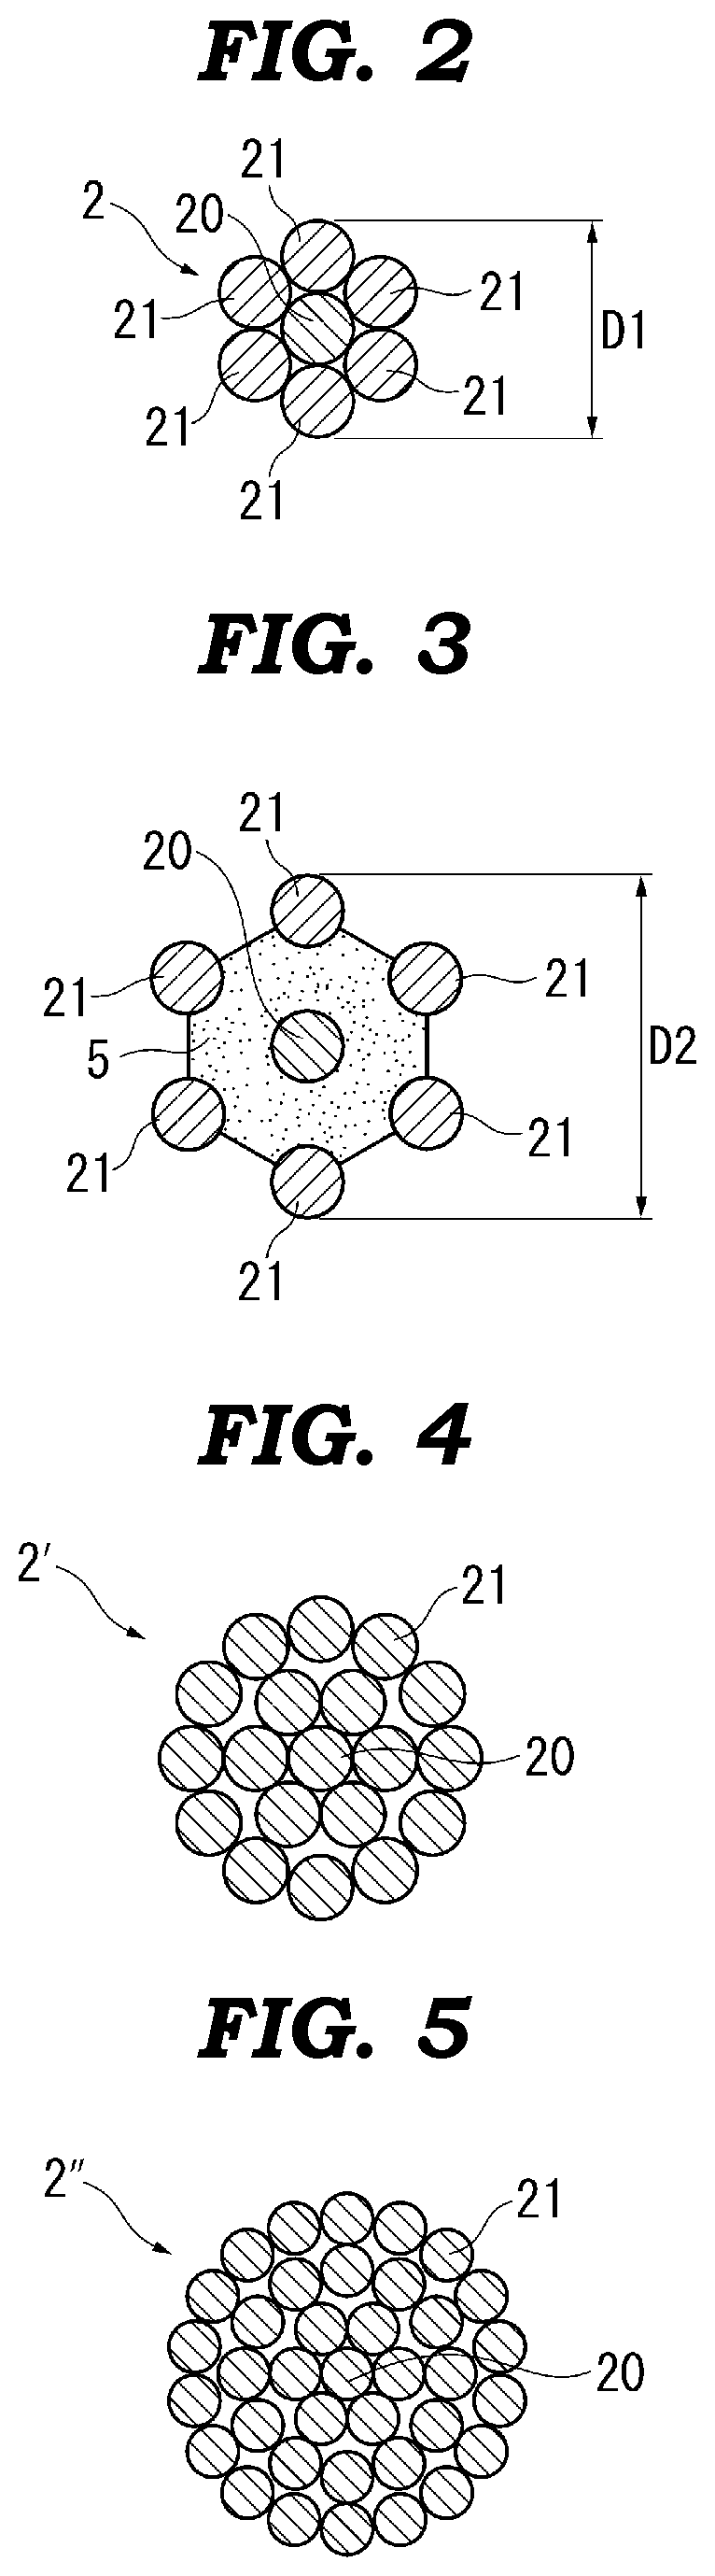 Anchorage of continuous fiber-reinforced polymer strands